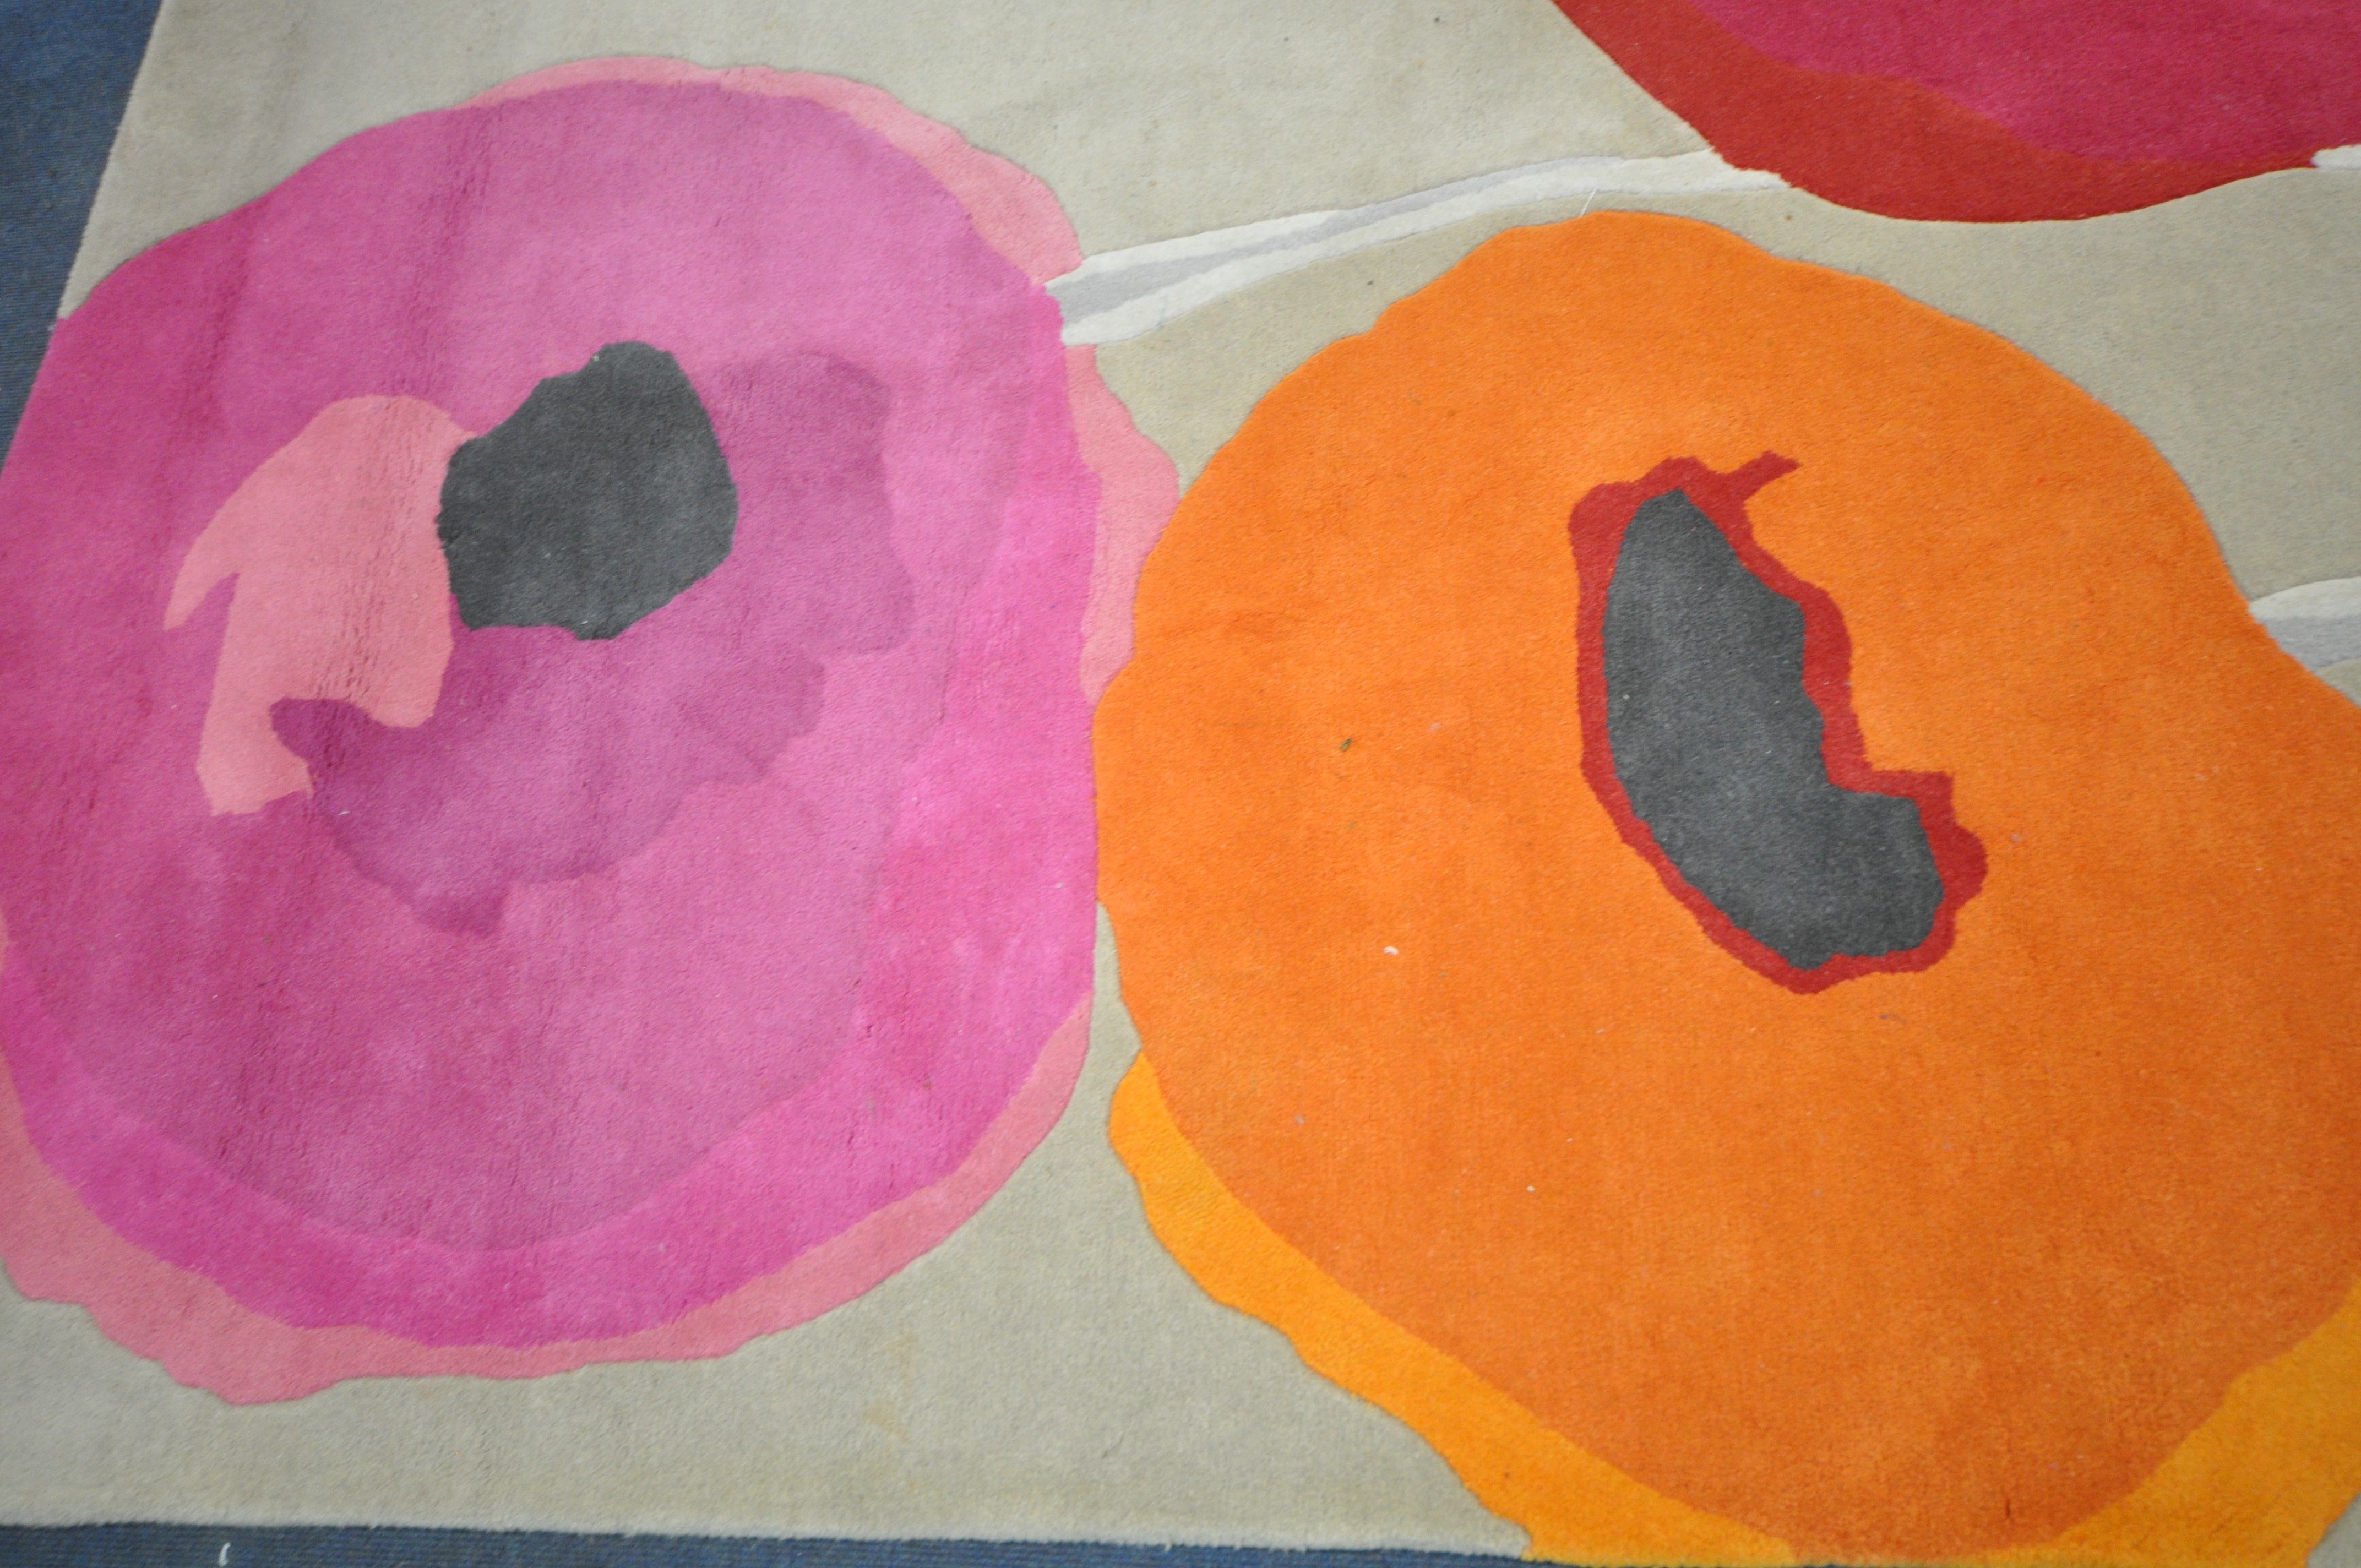 A SANDERSON WOOLEN RUG, with POPPIES-red/orange 45700 design 280cm x 200cm, along with a Made.com - Image 2 of 8